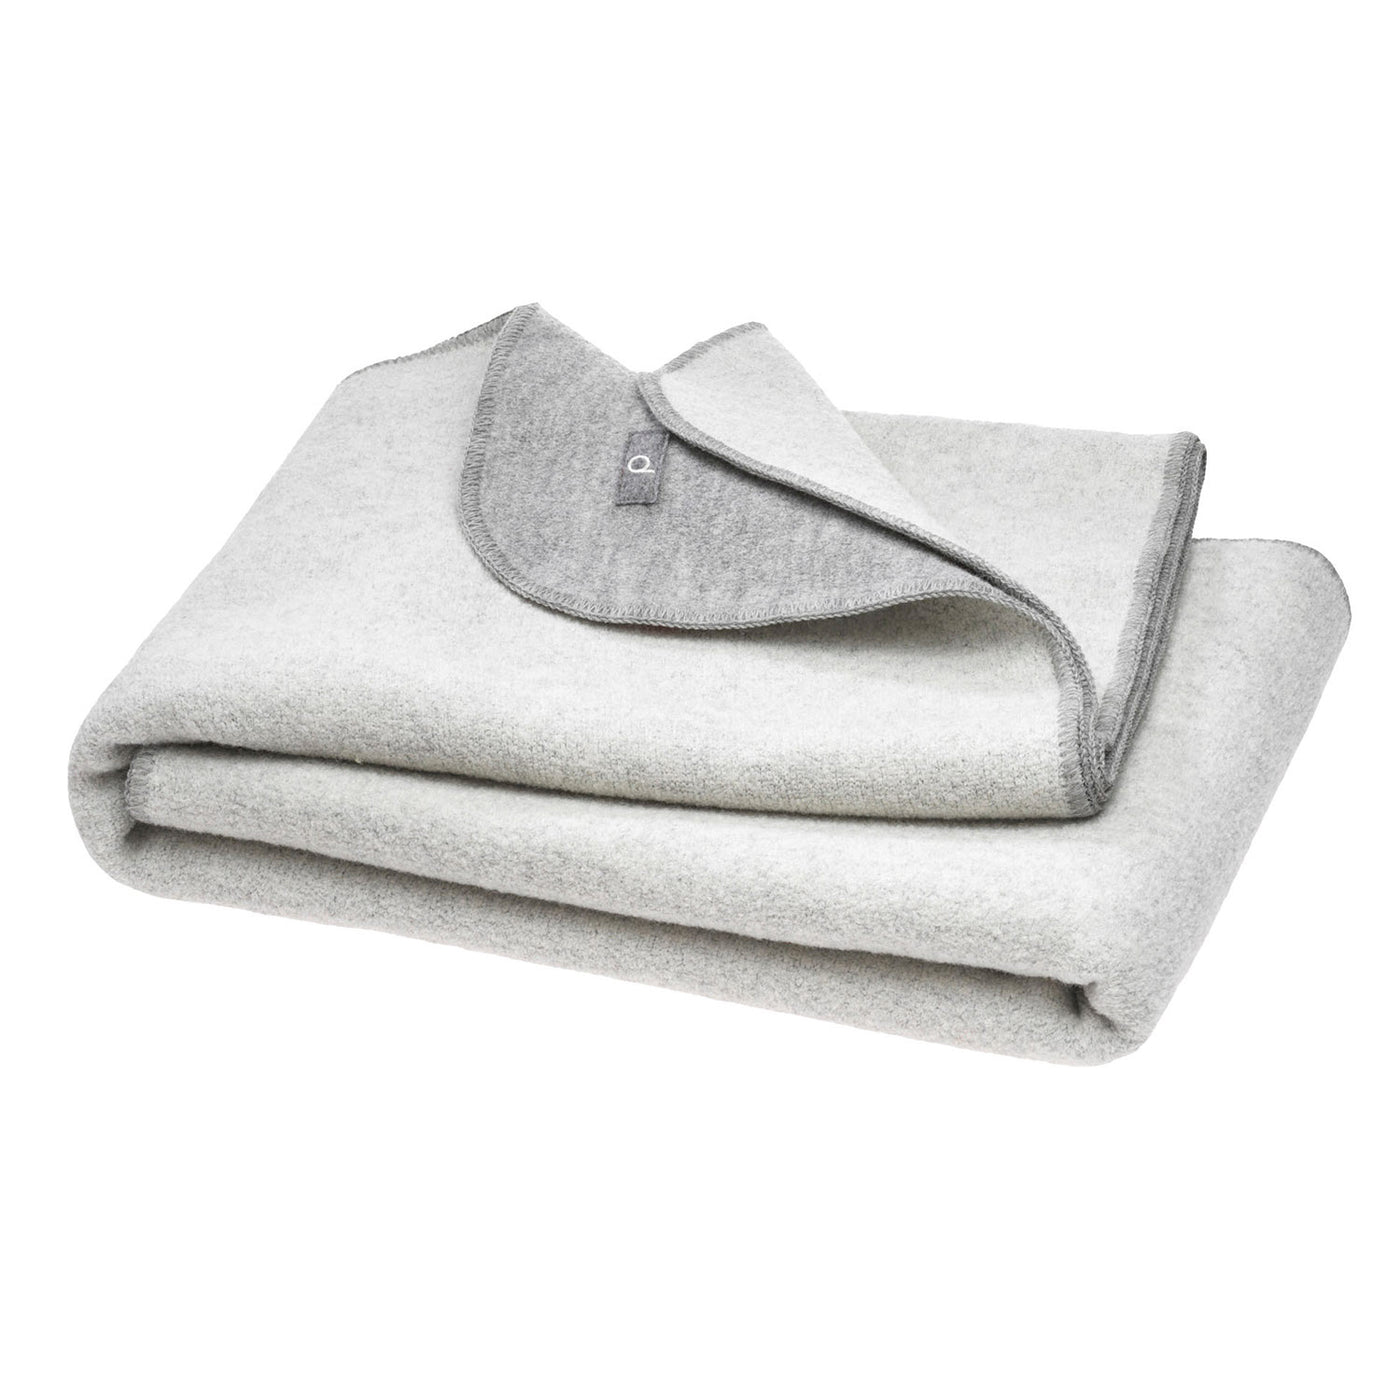 Disana organic boiled wool doubleface blanket grey natural